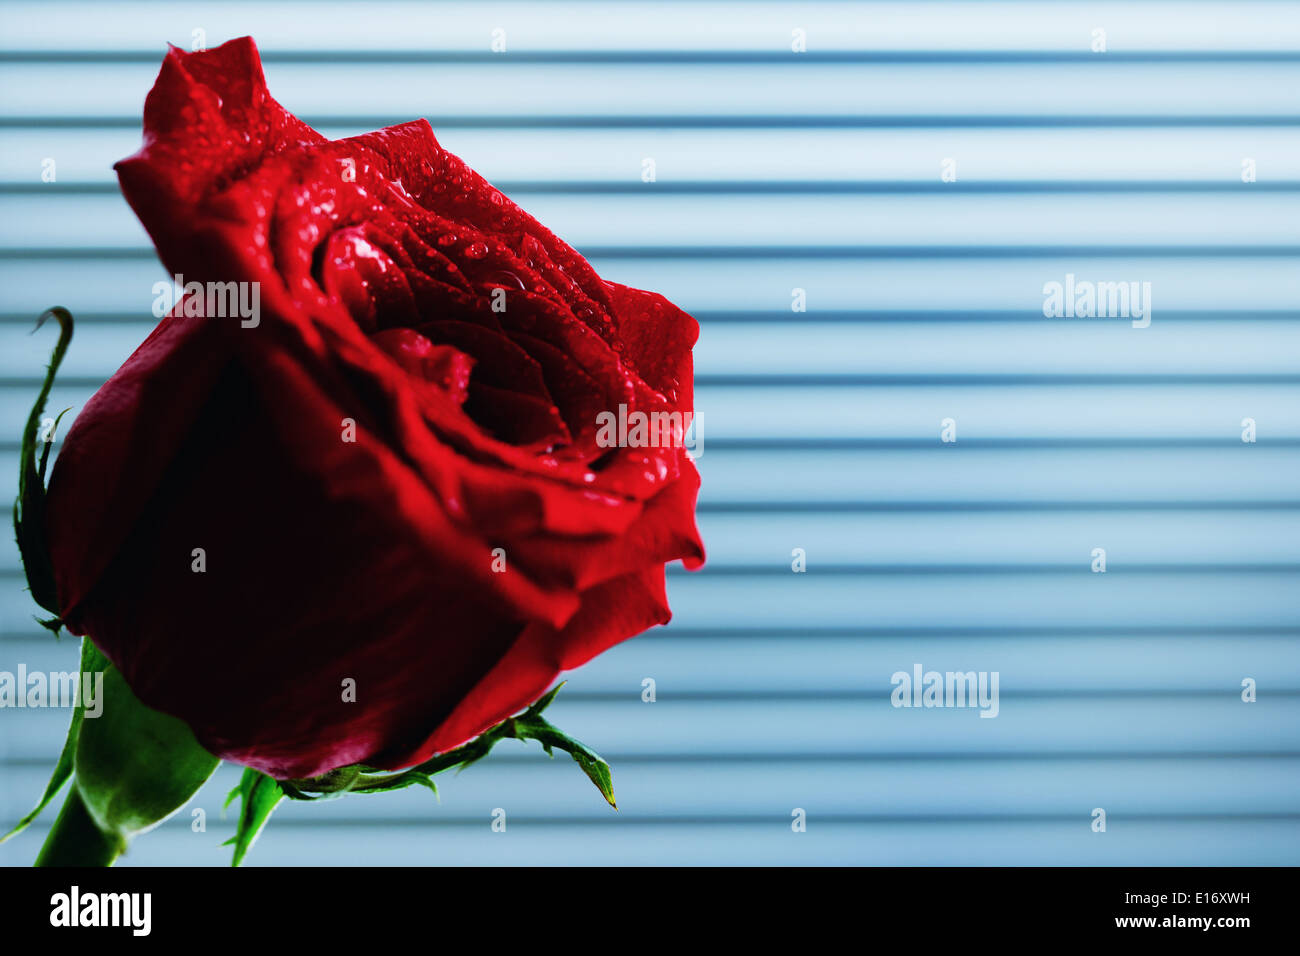 Red rose with water droplets isolated on background with lines Stock Photo